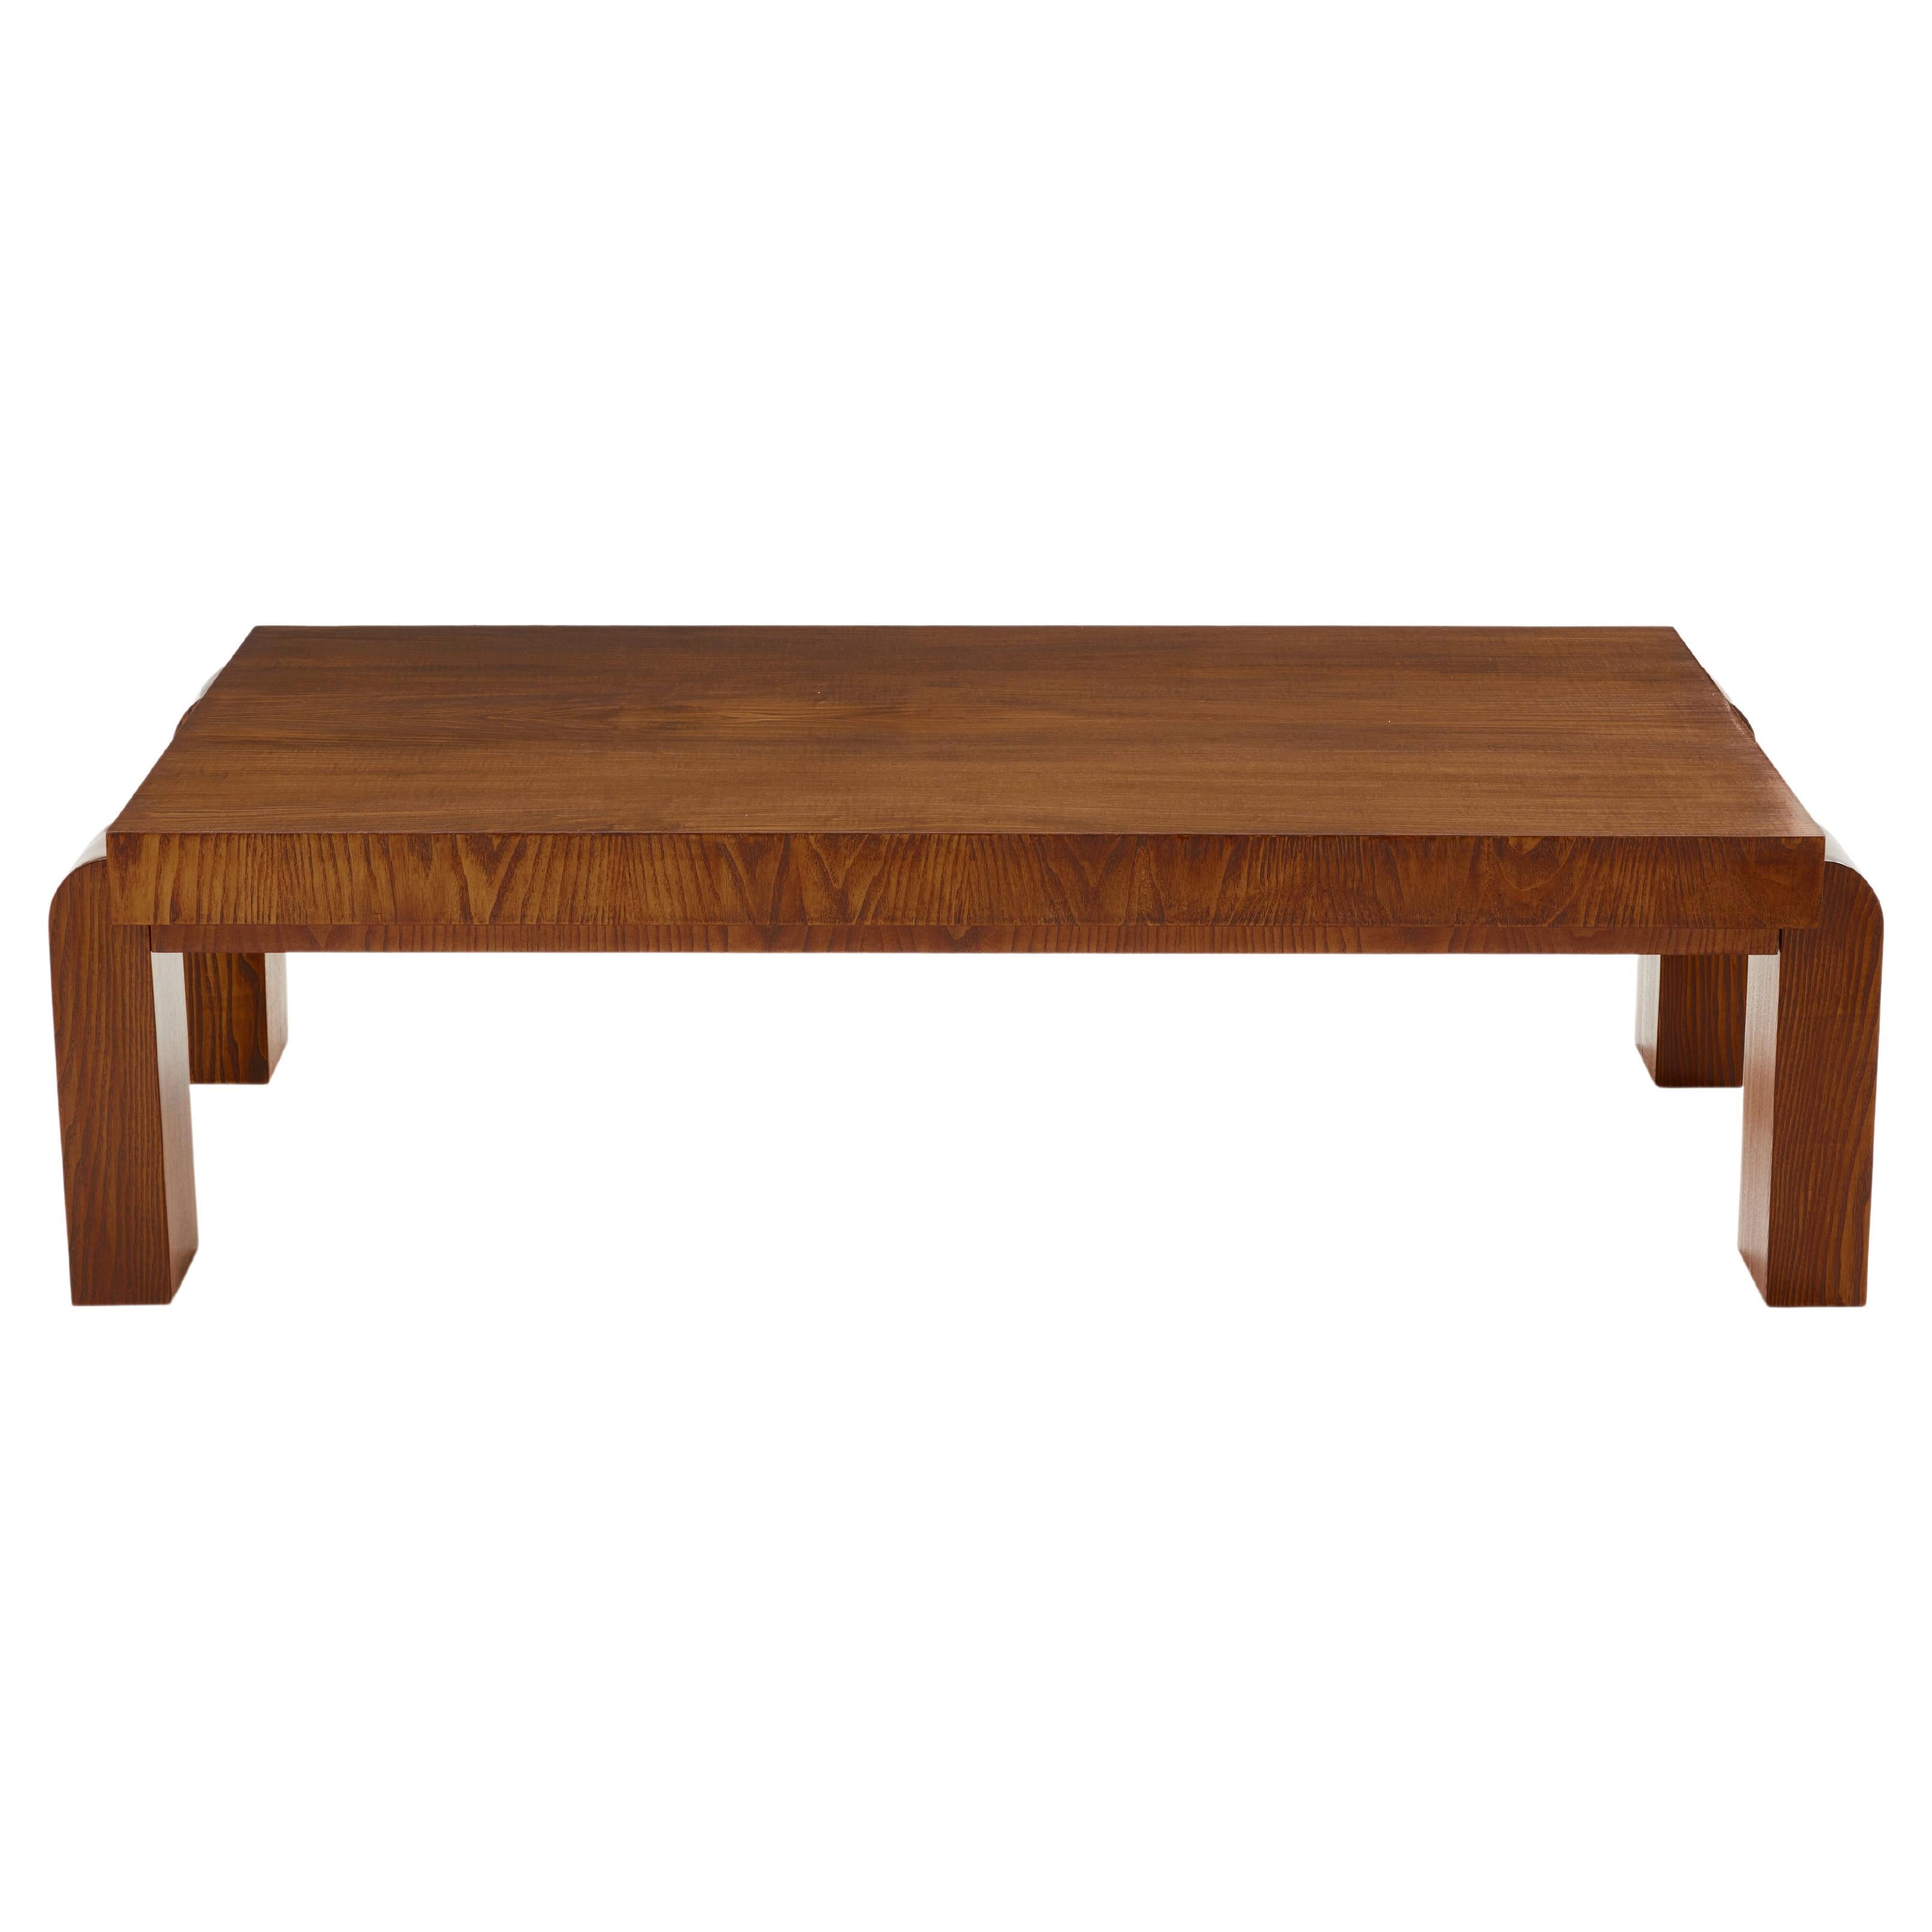 Michel Dufet modernist ashwood coffee table 1930 For Sale